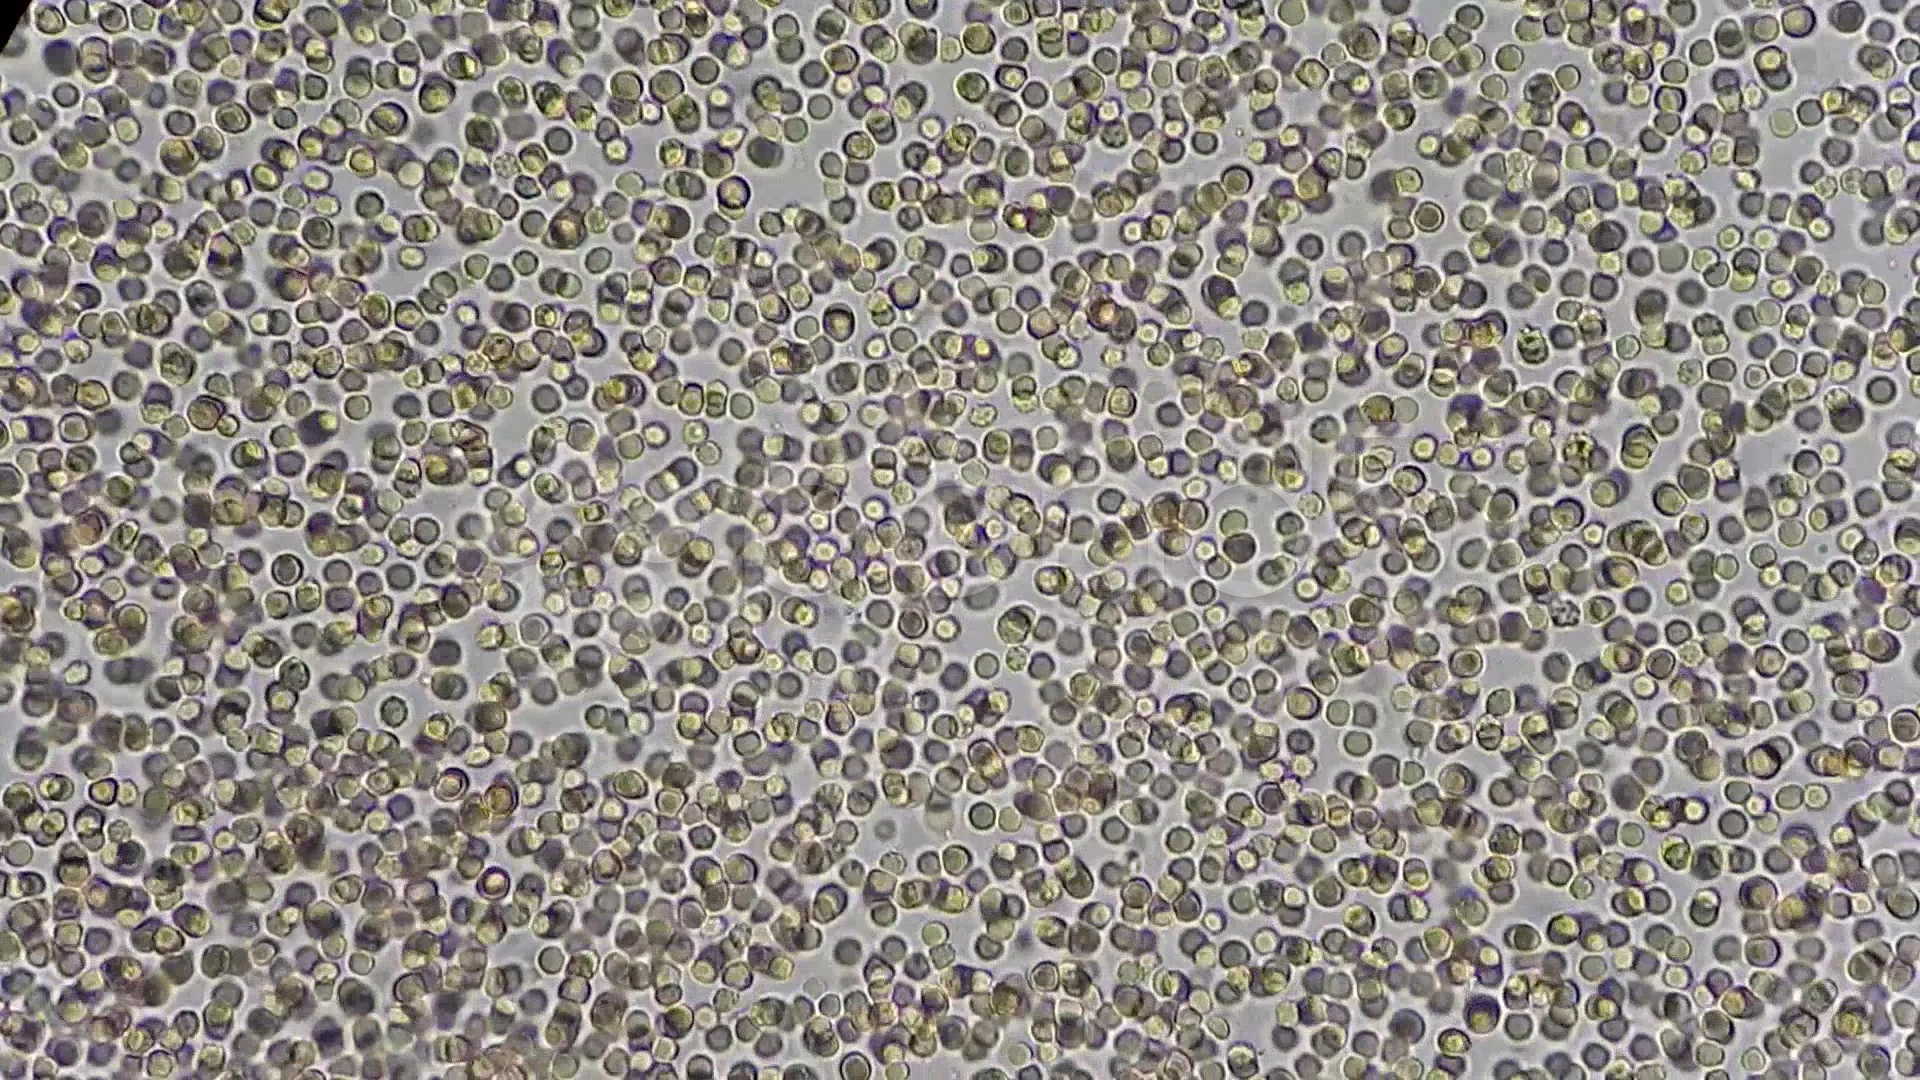 human white blood cells under microscope